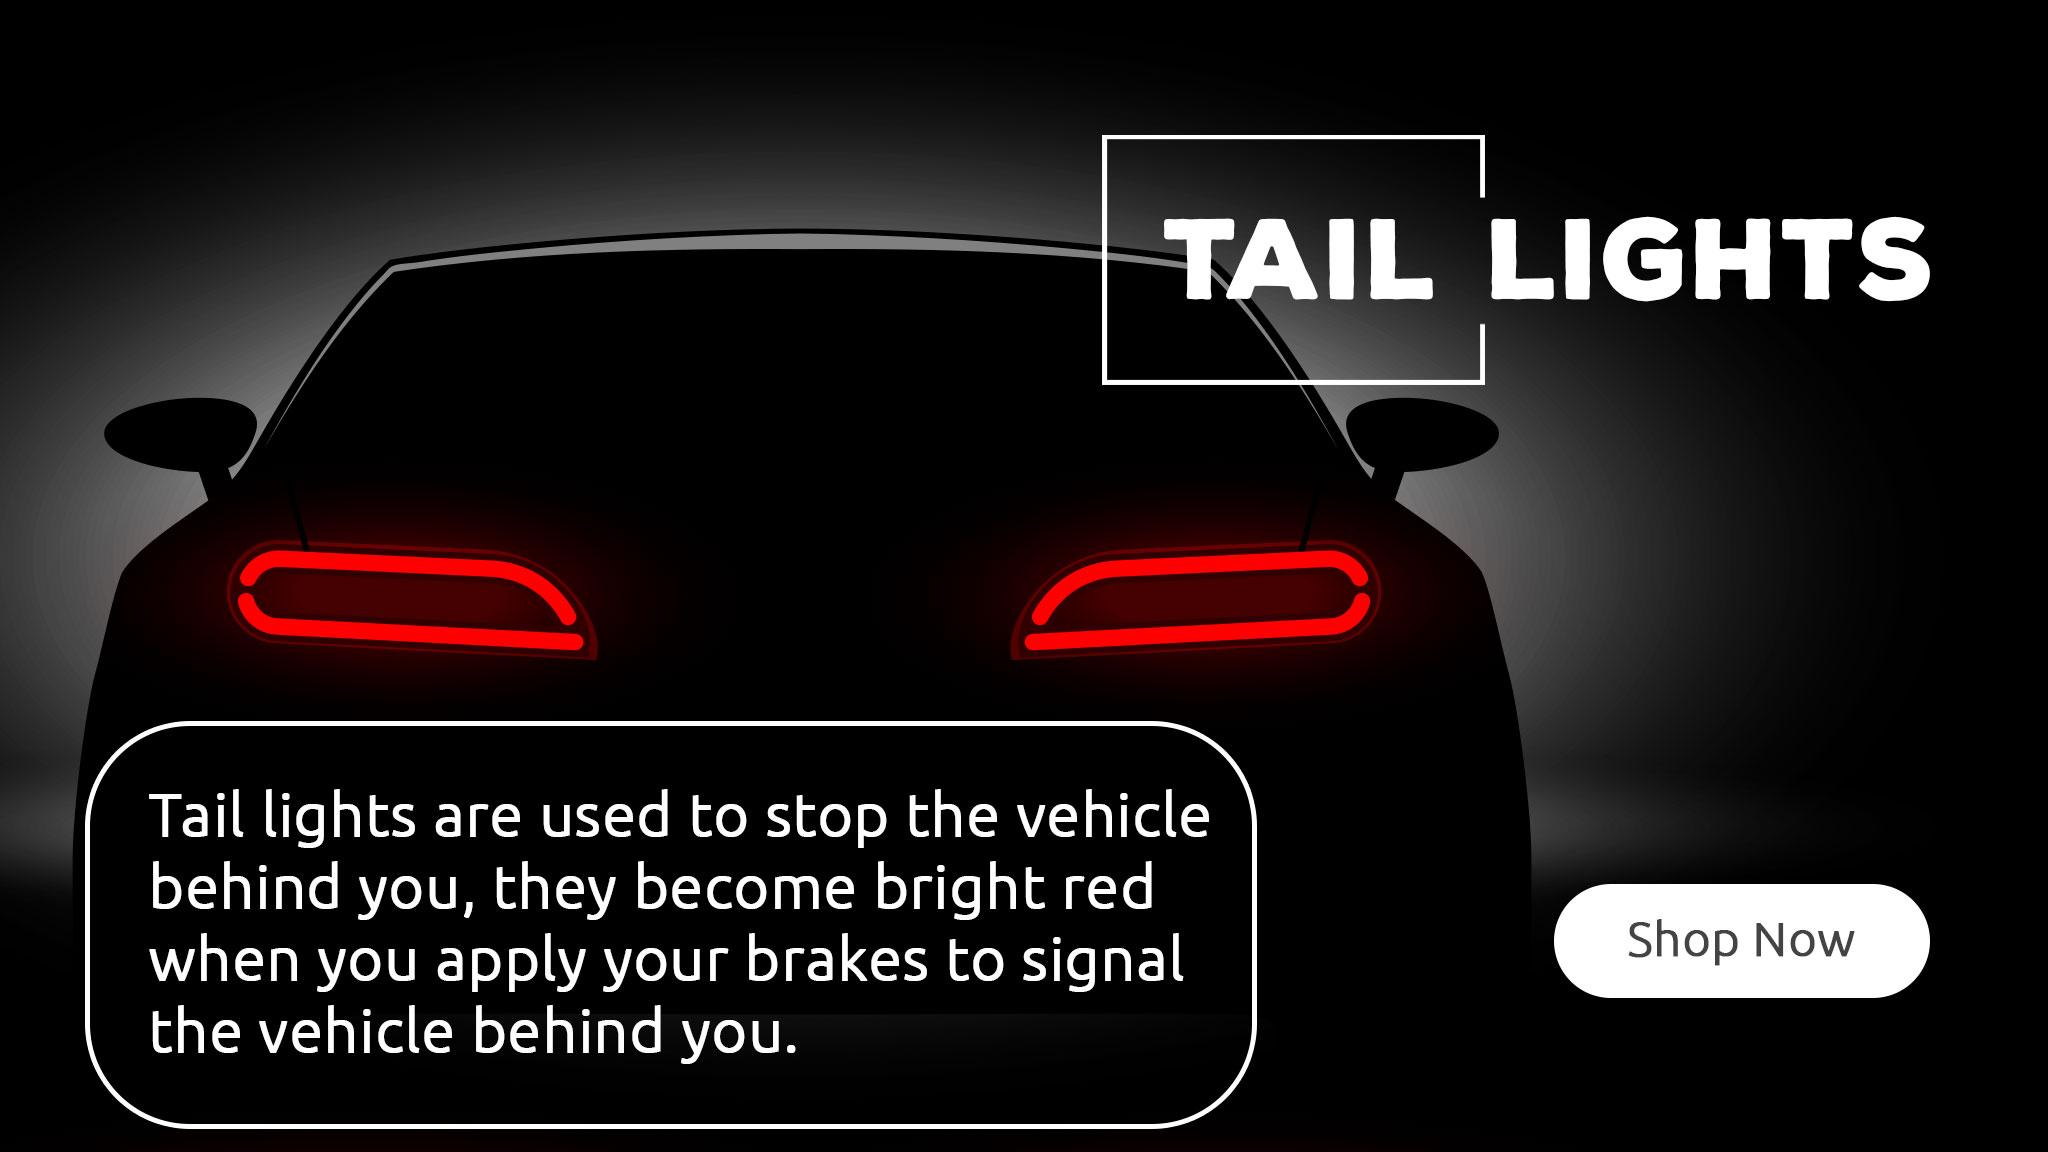 Tail lights are used to stop the vehicle behind you, they become bright red when you apply your brakes to signal the vehicle behind you.